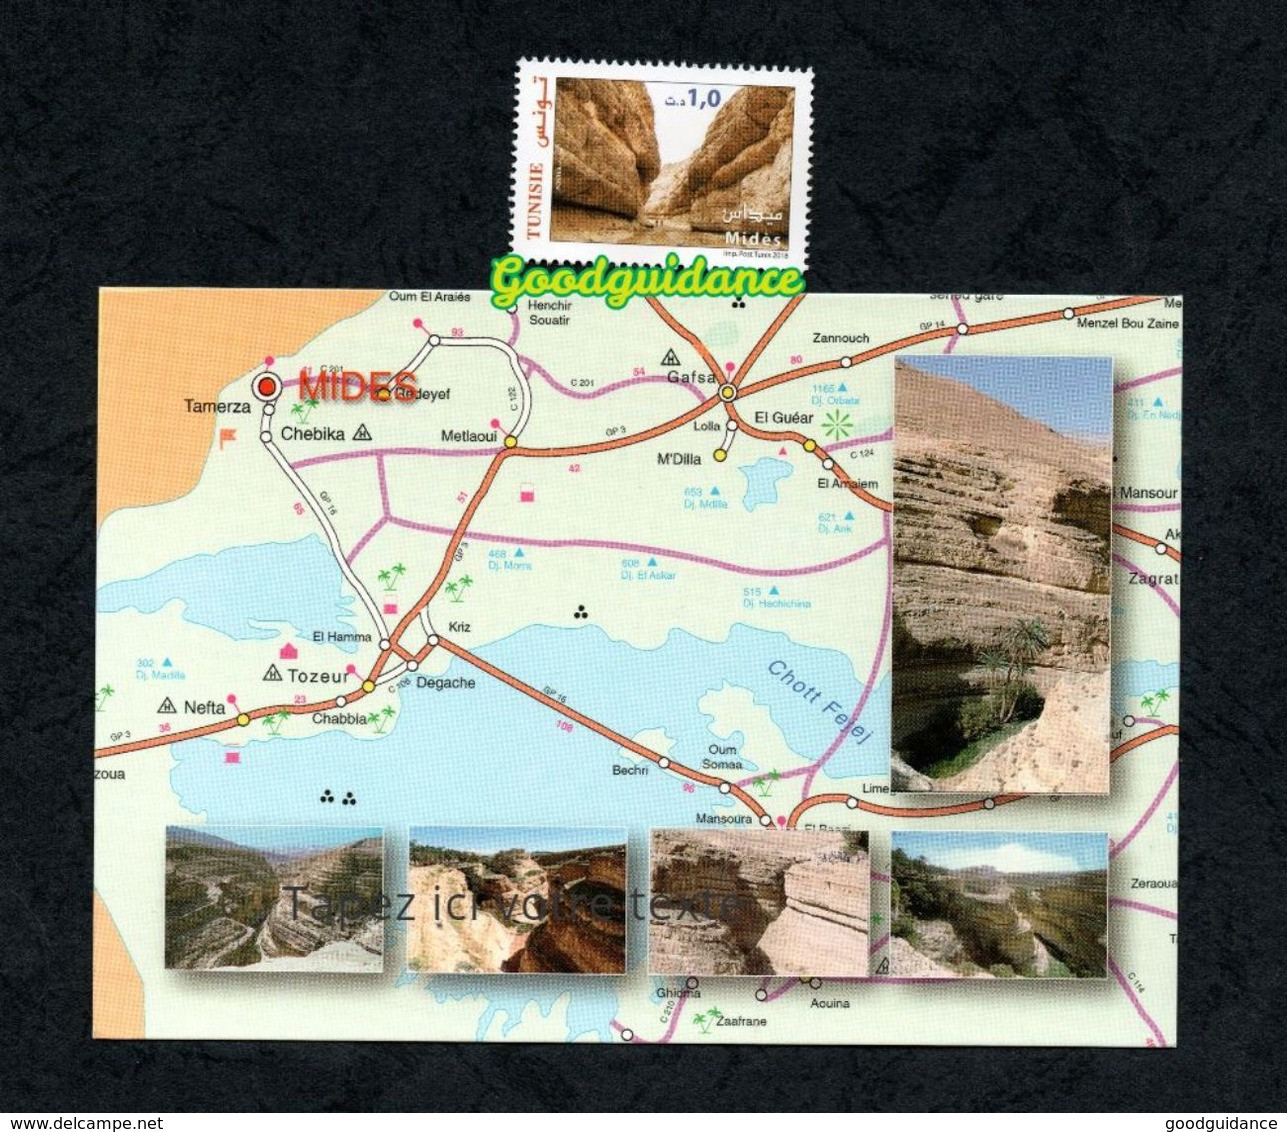 2018- Tunisia- Touristic And Archaeological Sites In Tunisia- Mides Postcard And Stamp MNH** - Arqueología